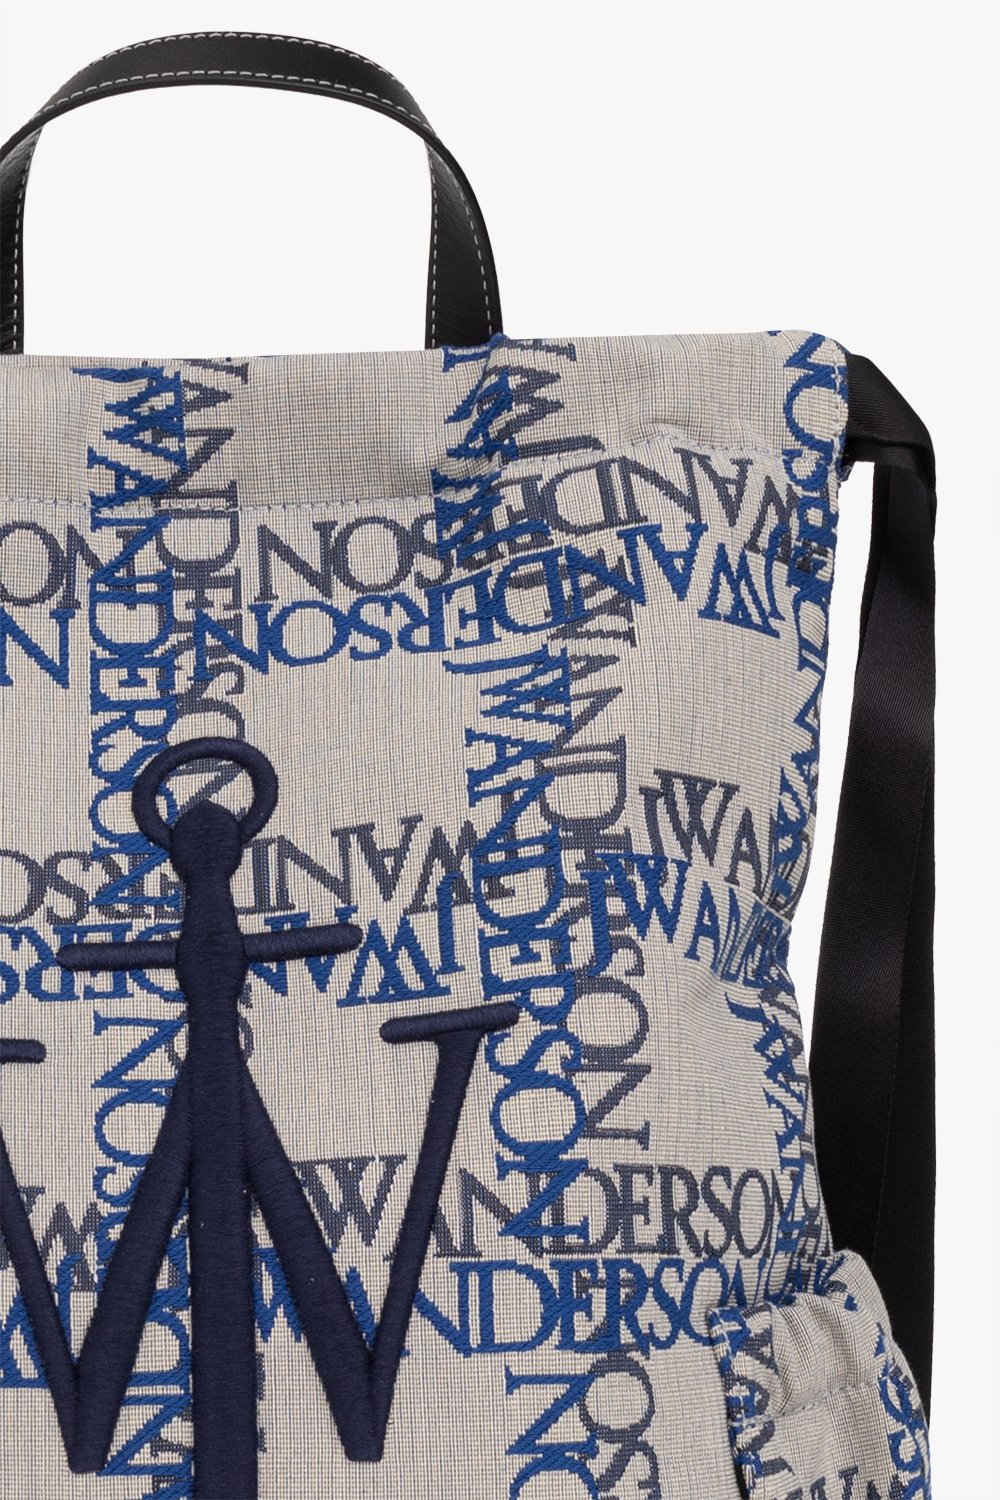 JW Anderson has become the It-bag of the year